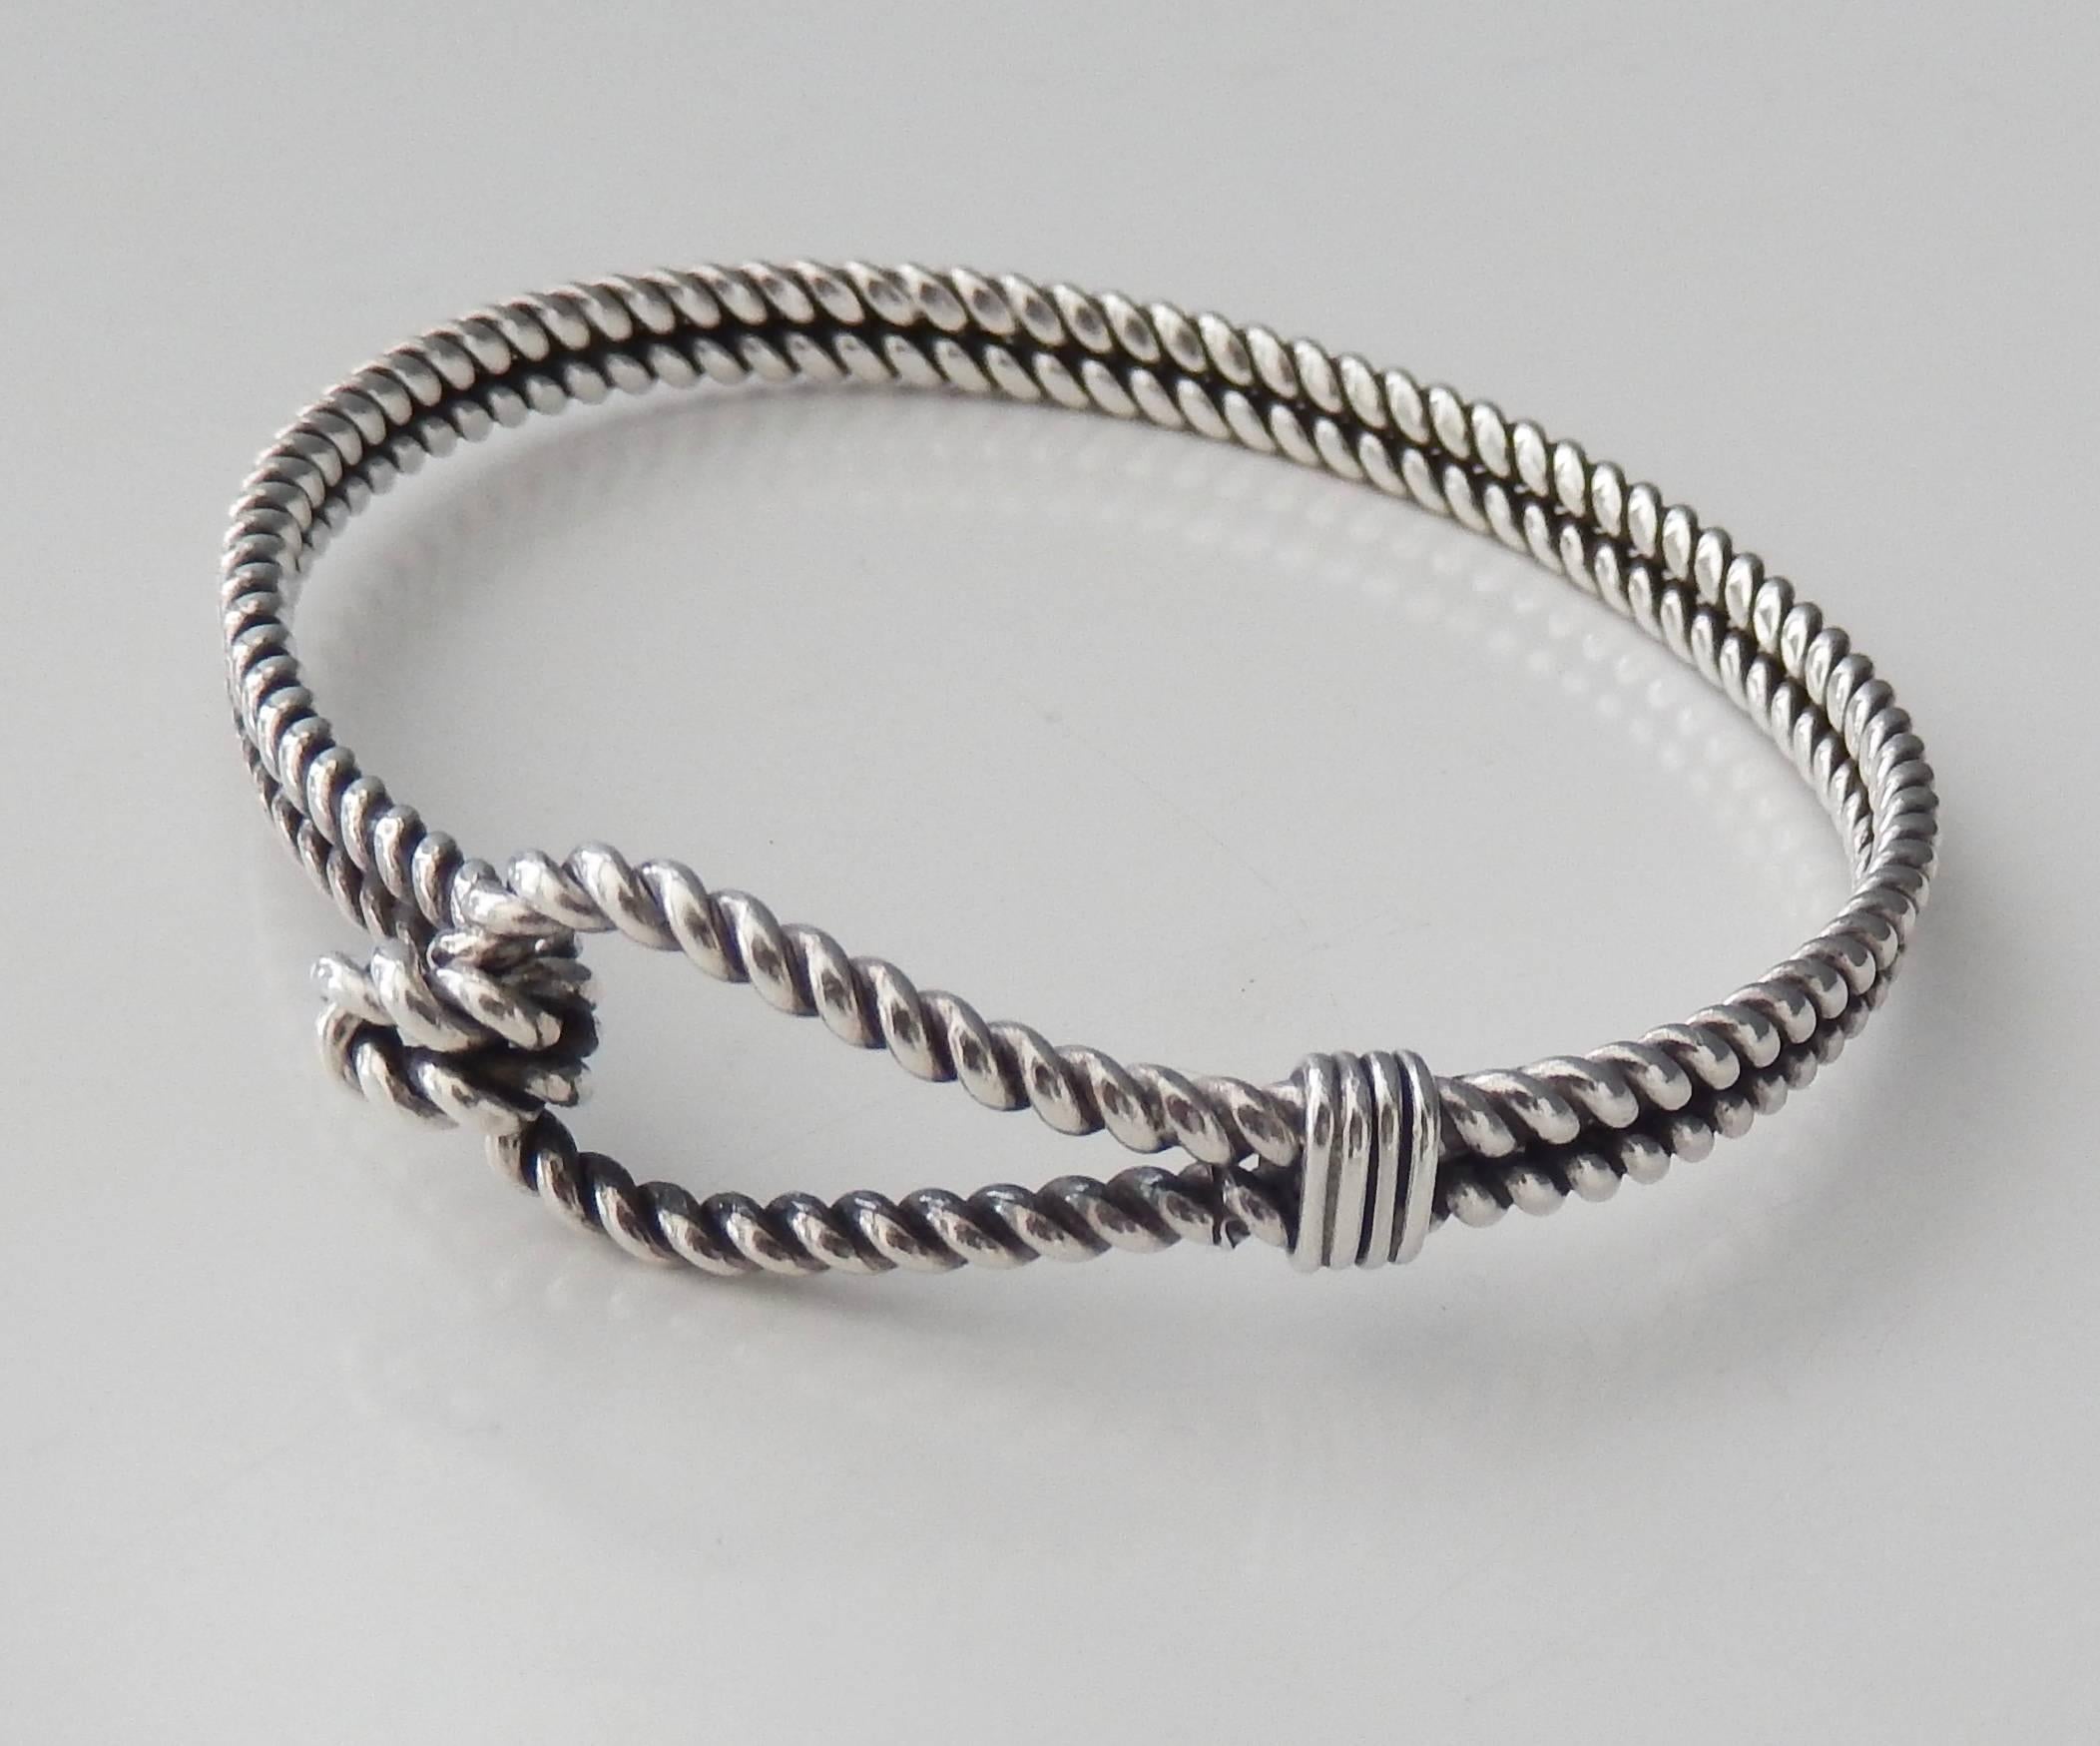 A modernist, sophisticated sterling silver bracelet with an integrated closure by Gucci.  A very comfortable fit for a small wrist. 
Marked:  GUCCI ITALY 925

Approximate wrist size:  7 in